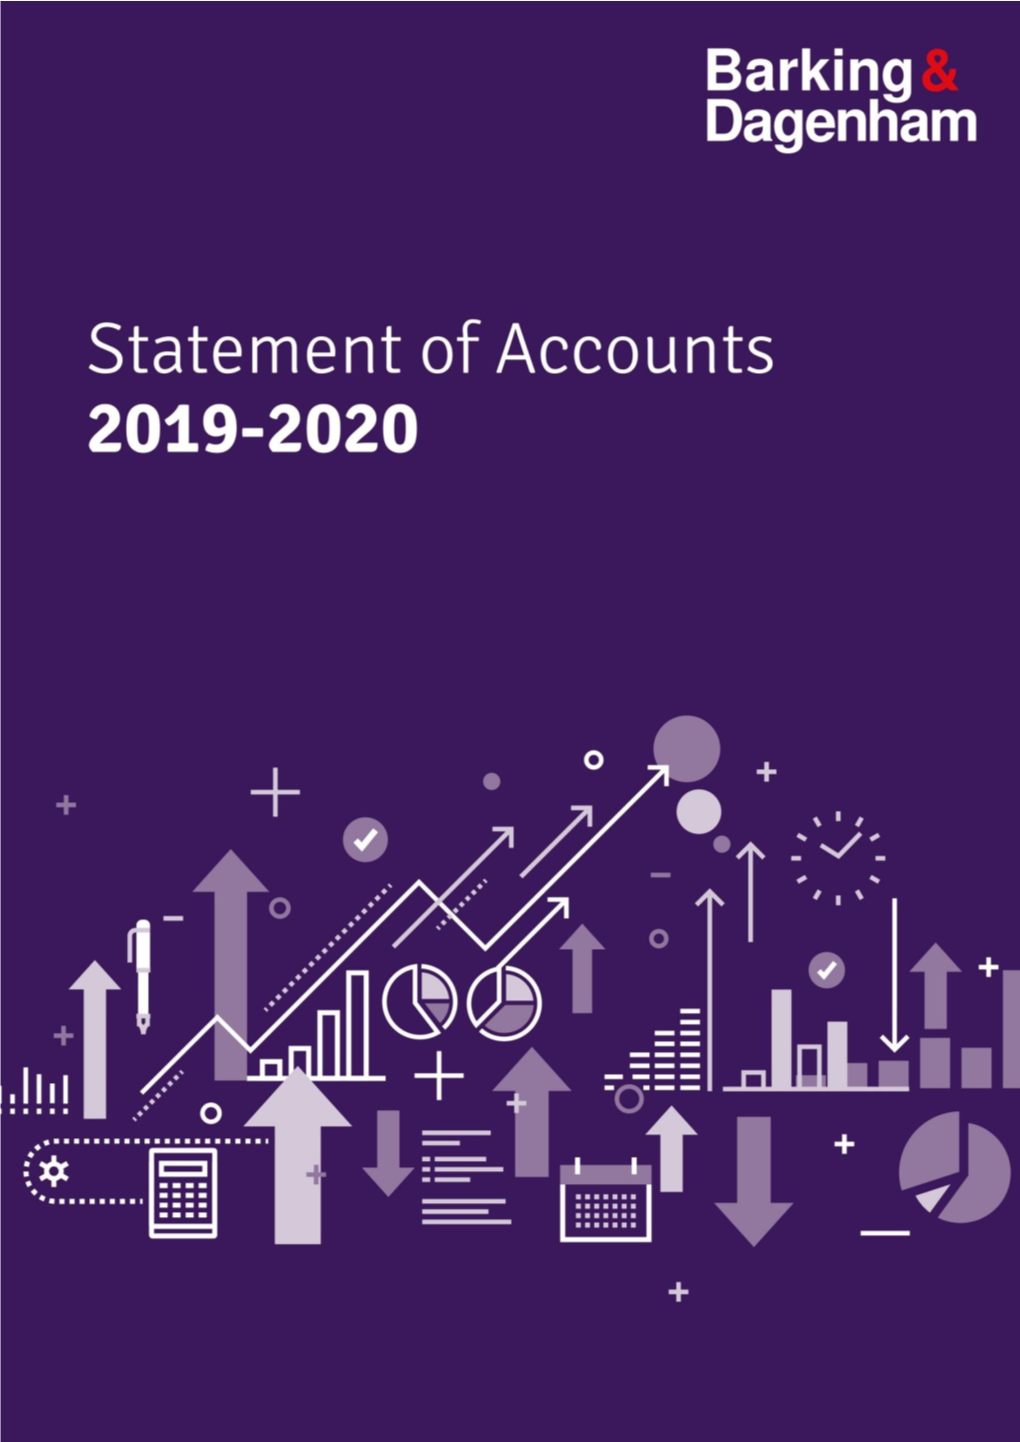 LBBD Statement of Accounts 2018-19